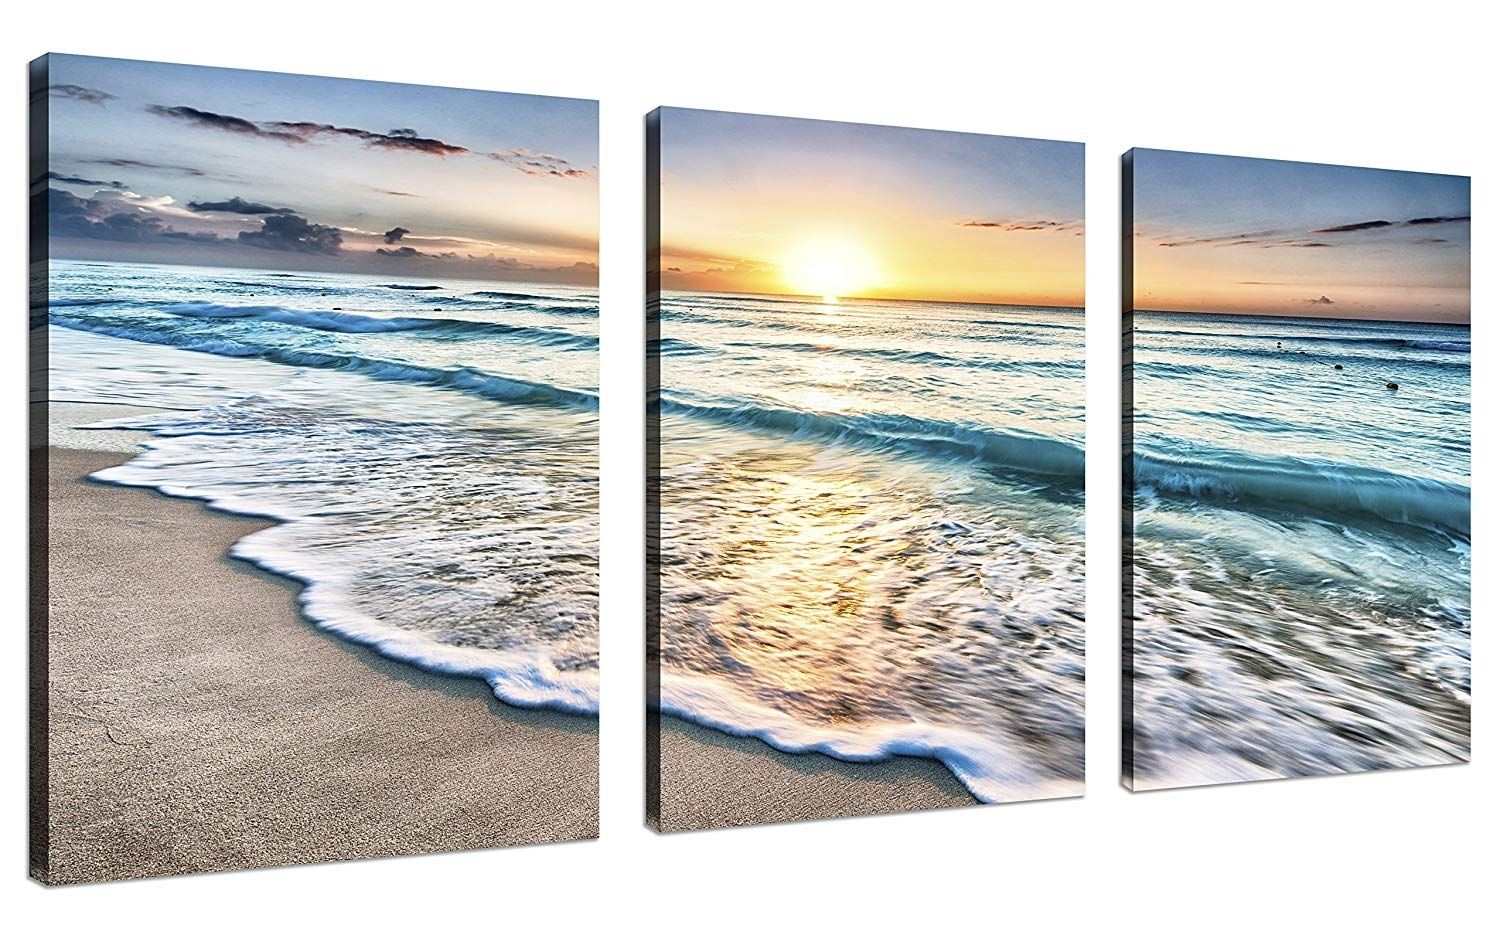 Framed Beach Canvas Wall Art Sunset Sand Ocean 3 Panel Home Picture Within Beach Wall Art (View 15 of 20)